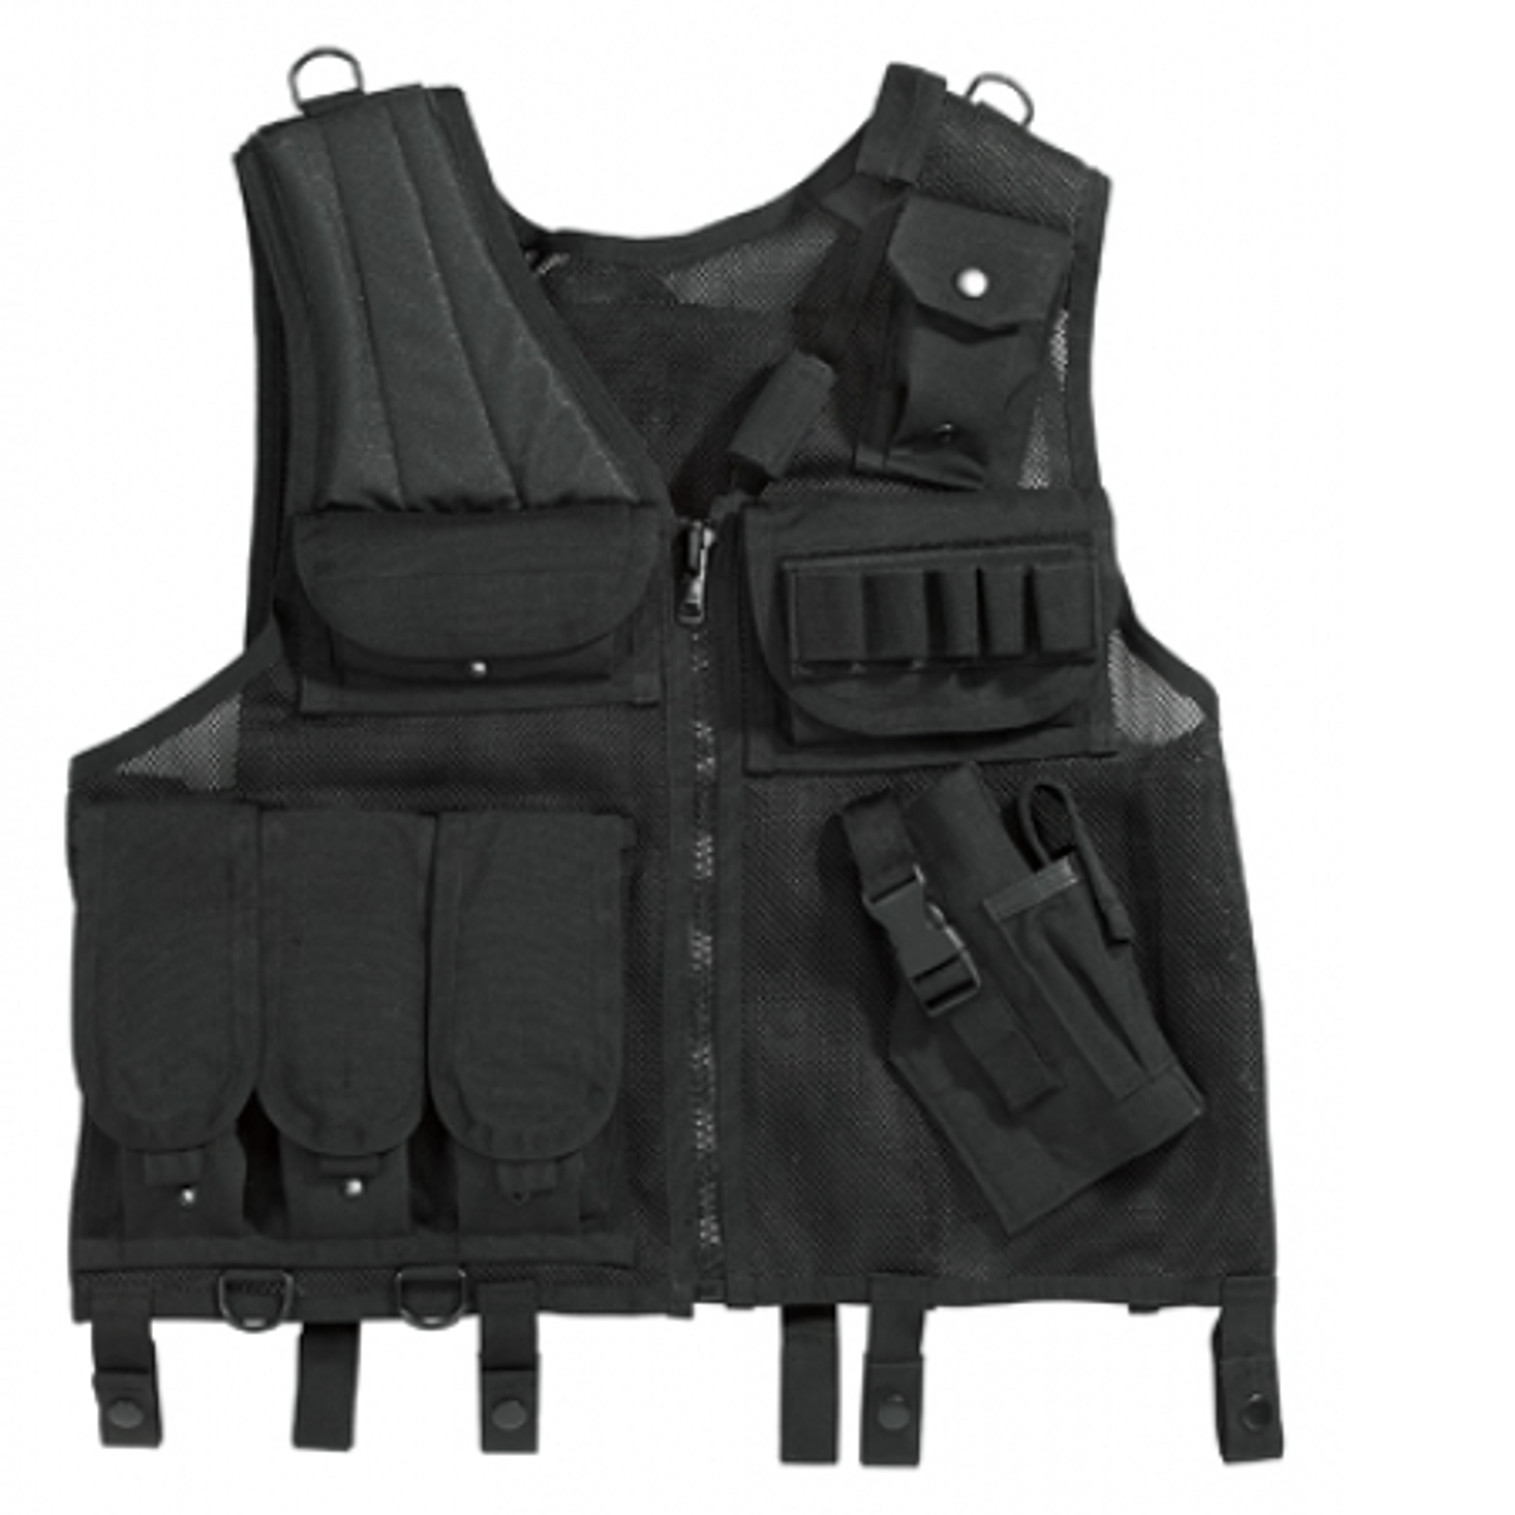 Rothco Quick Draw Tactical Vest - Black